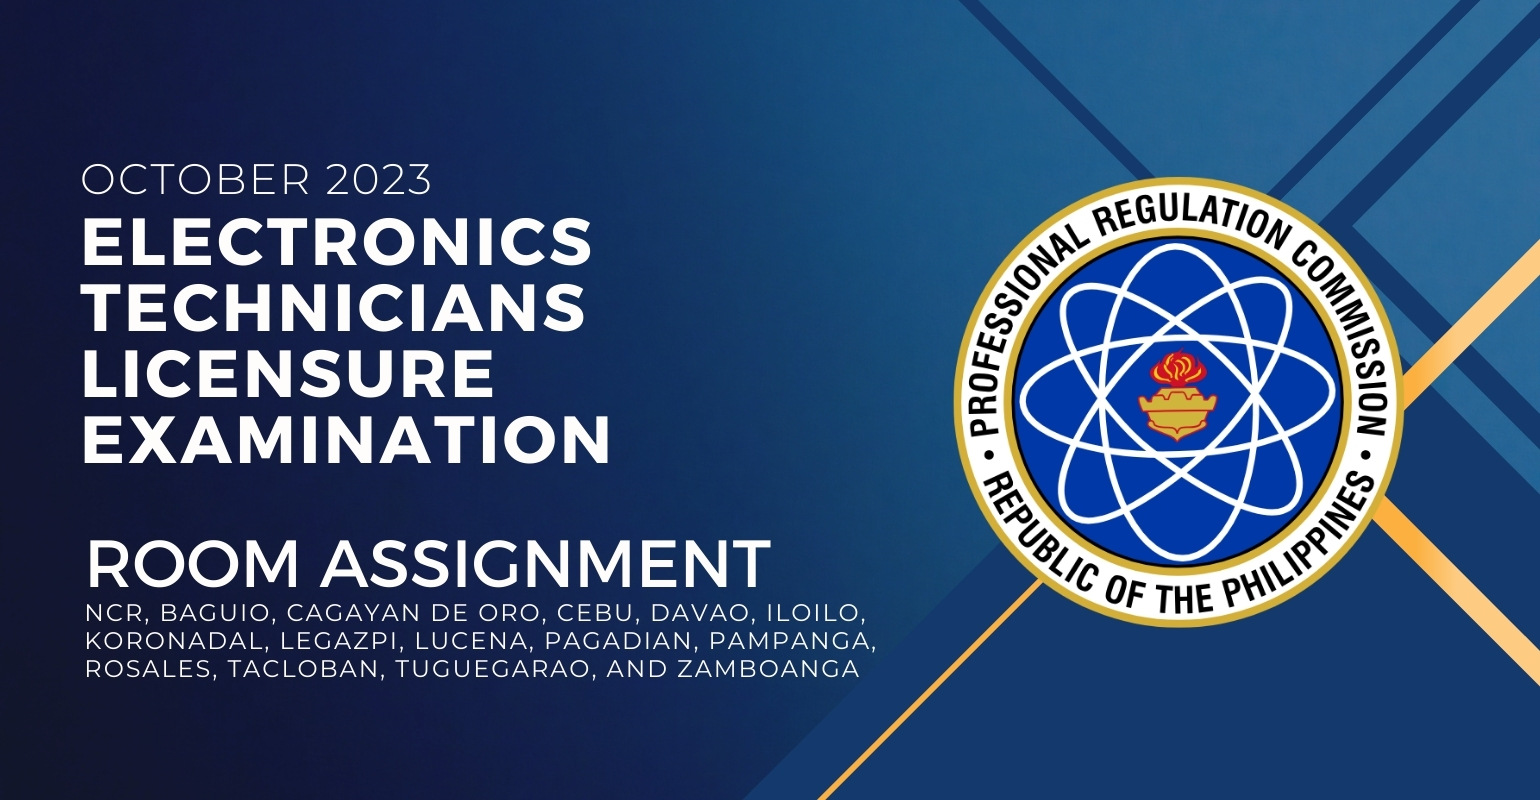 room assignment october 2023 electronic technicians licensure exam